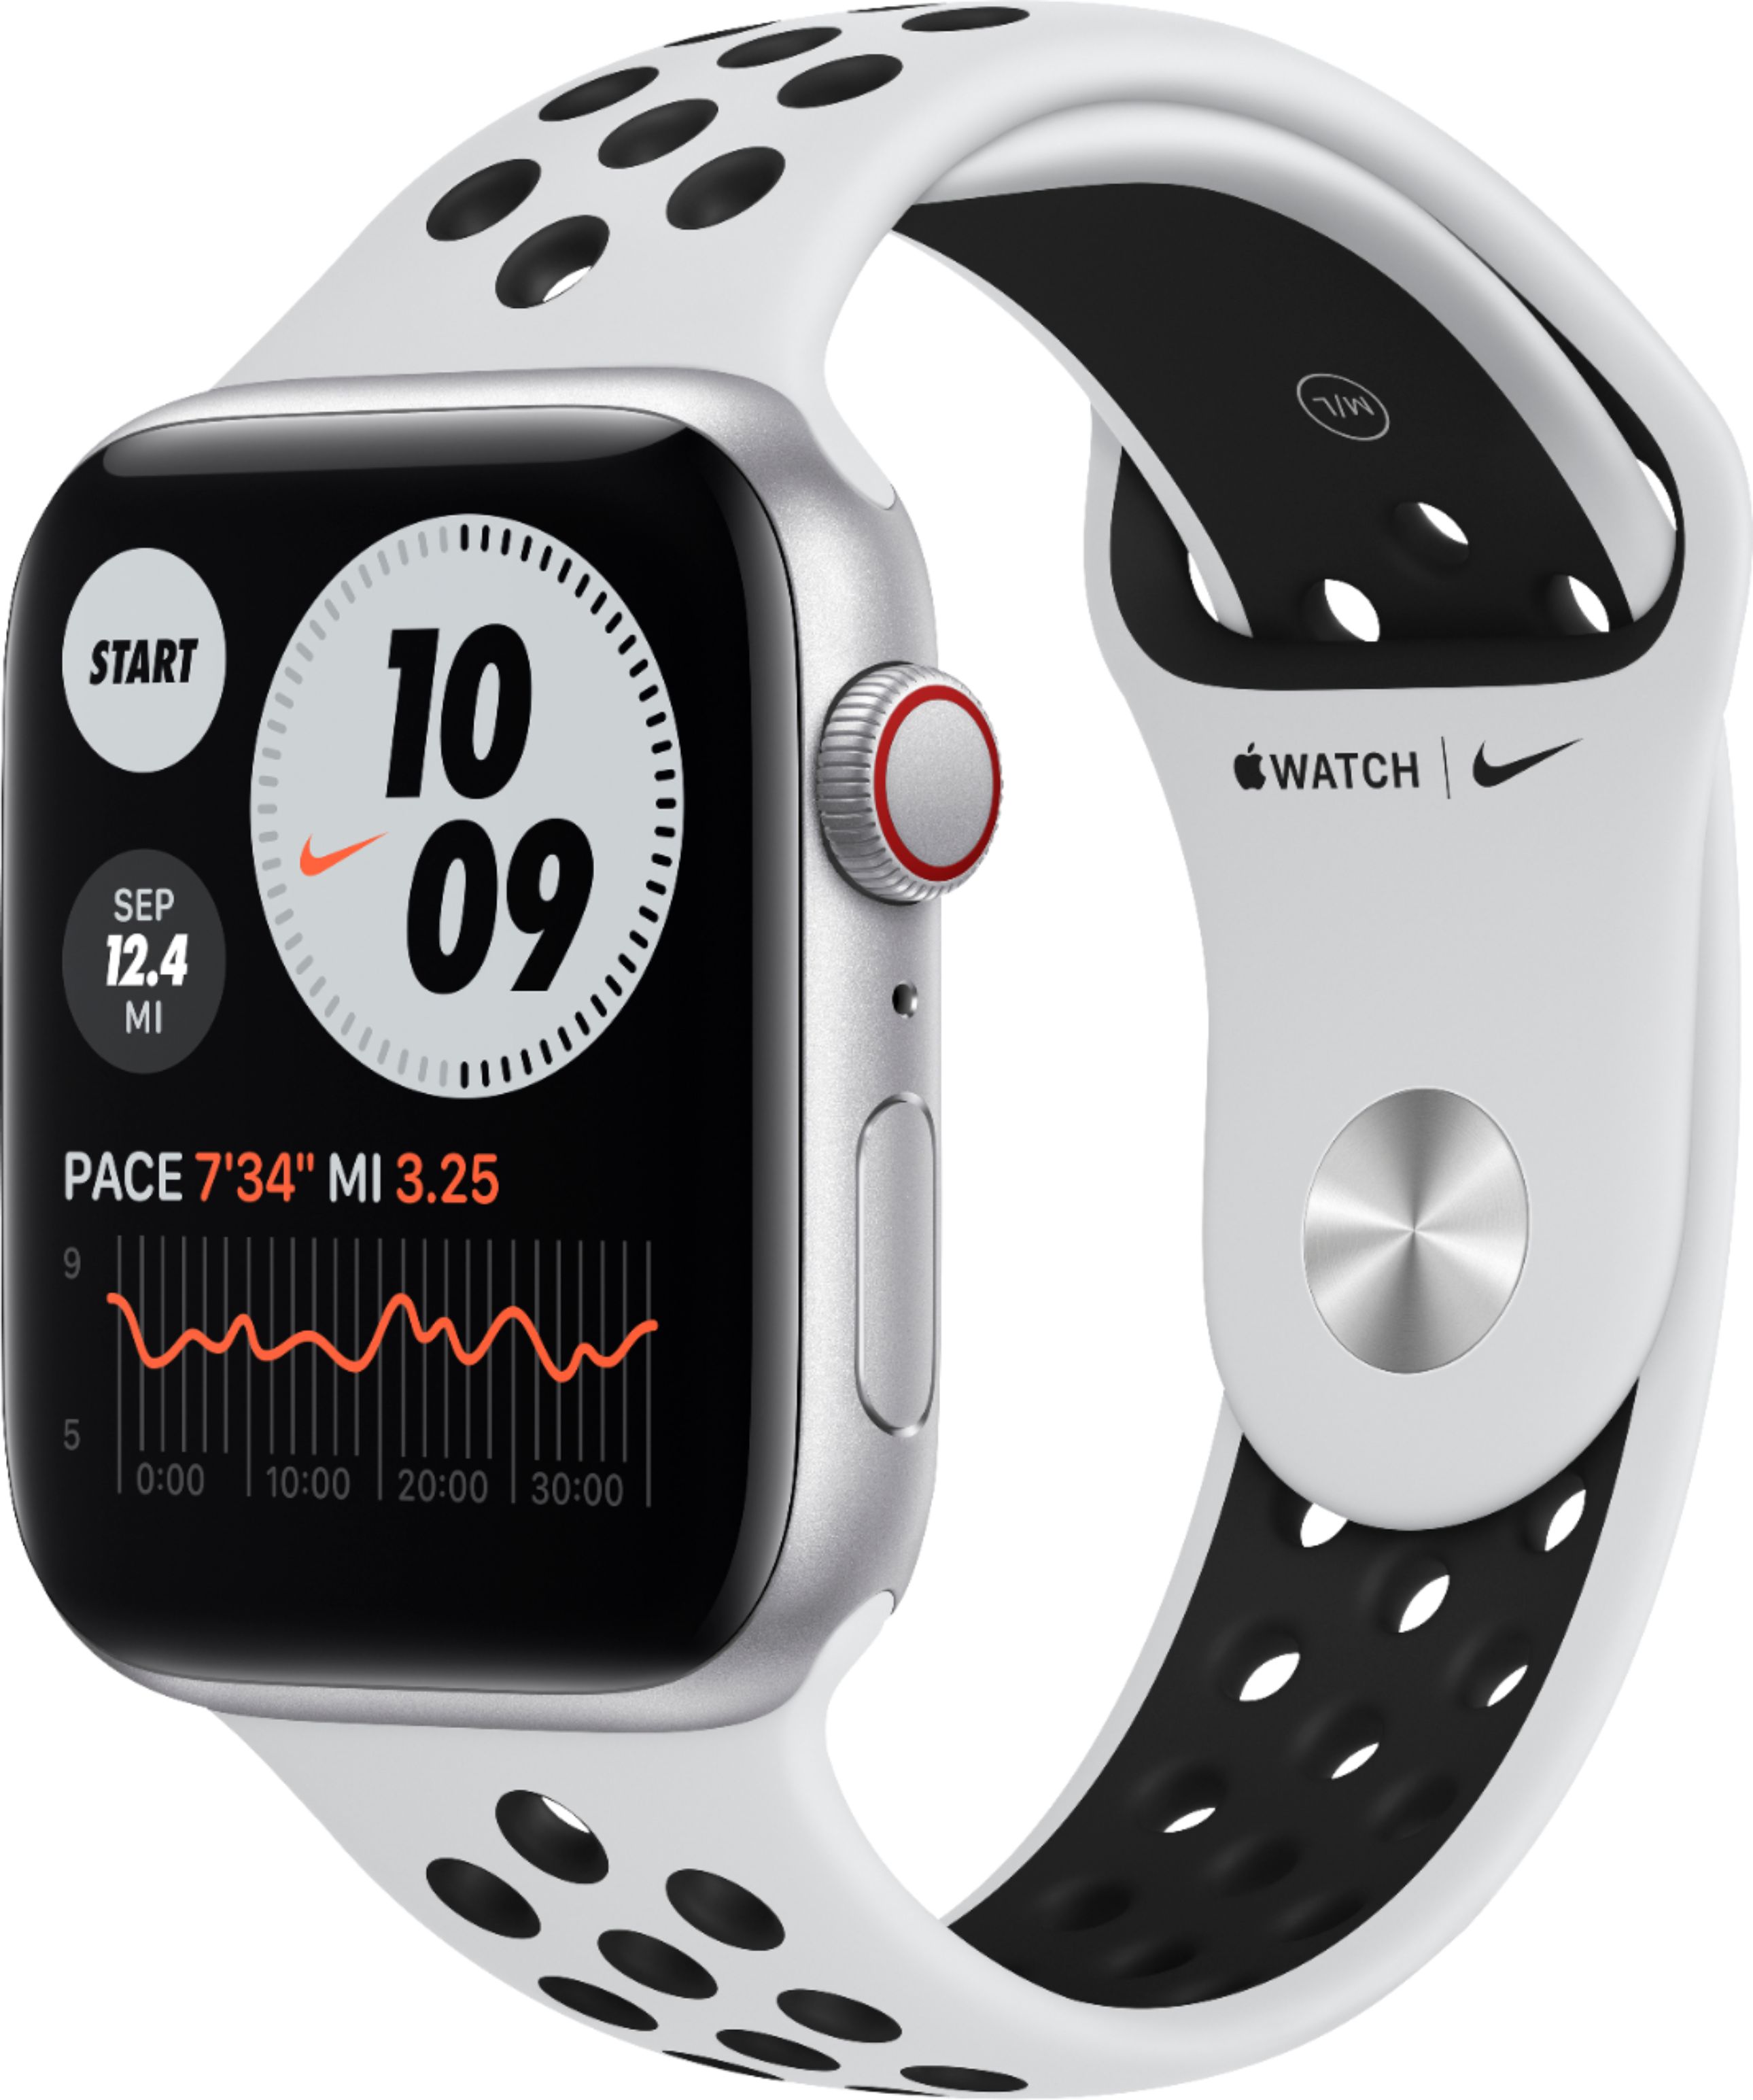 Caso Agencia de viajes exprimir Apple Watch Nike SE (GPS + Cellular) 44mm Silver Aluminum Case with Pure  Platinum/Black Nike Sport Band Silver (AT&T) MG043LL/A - Best Buy